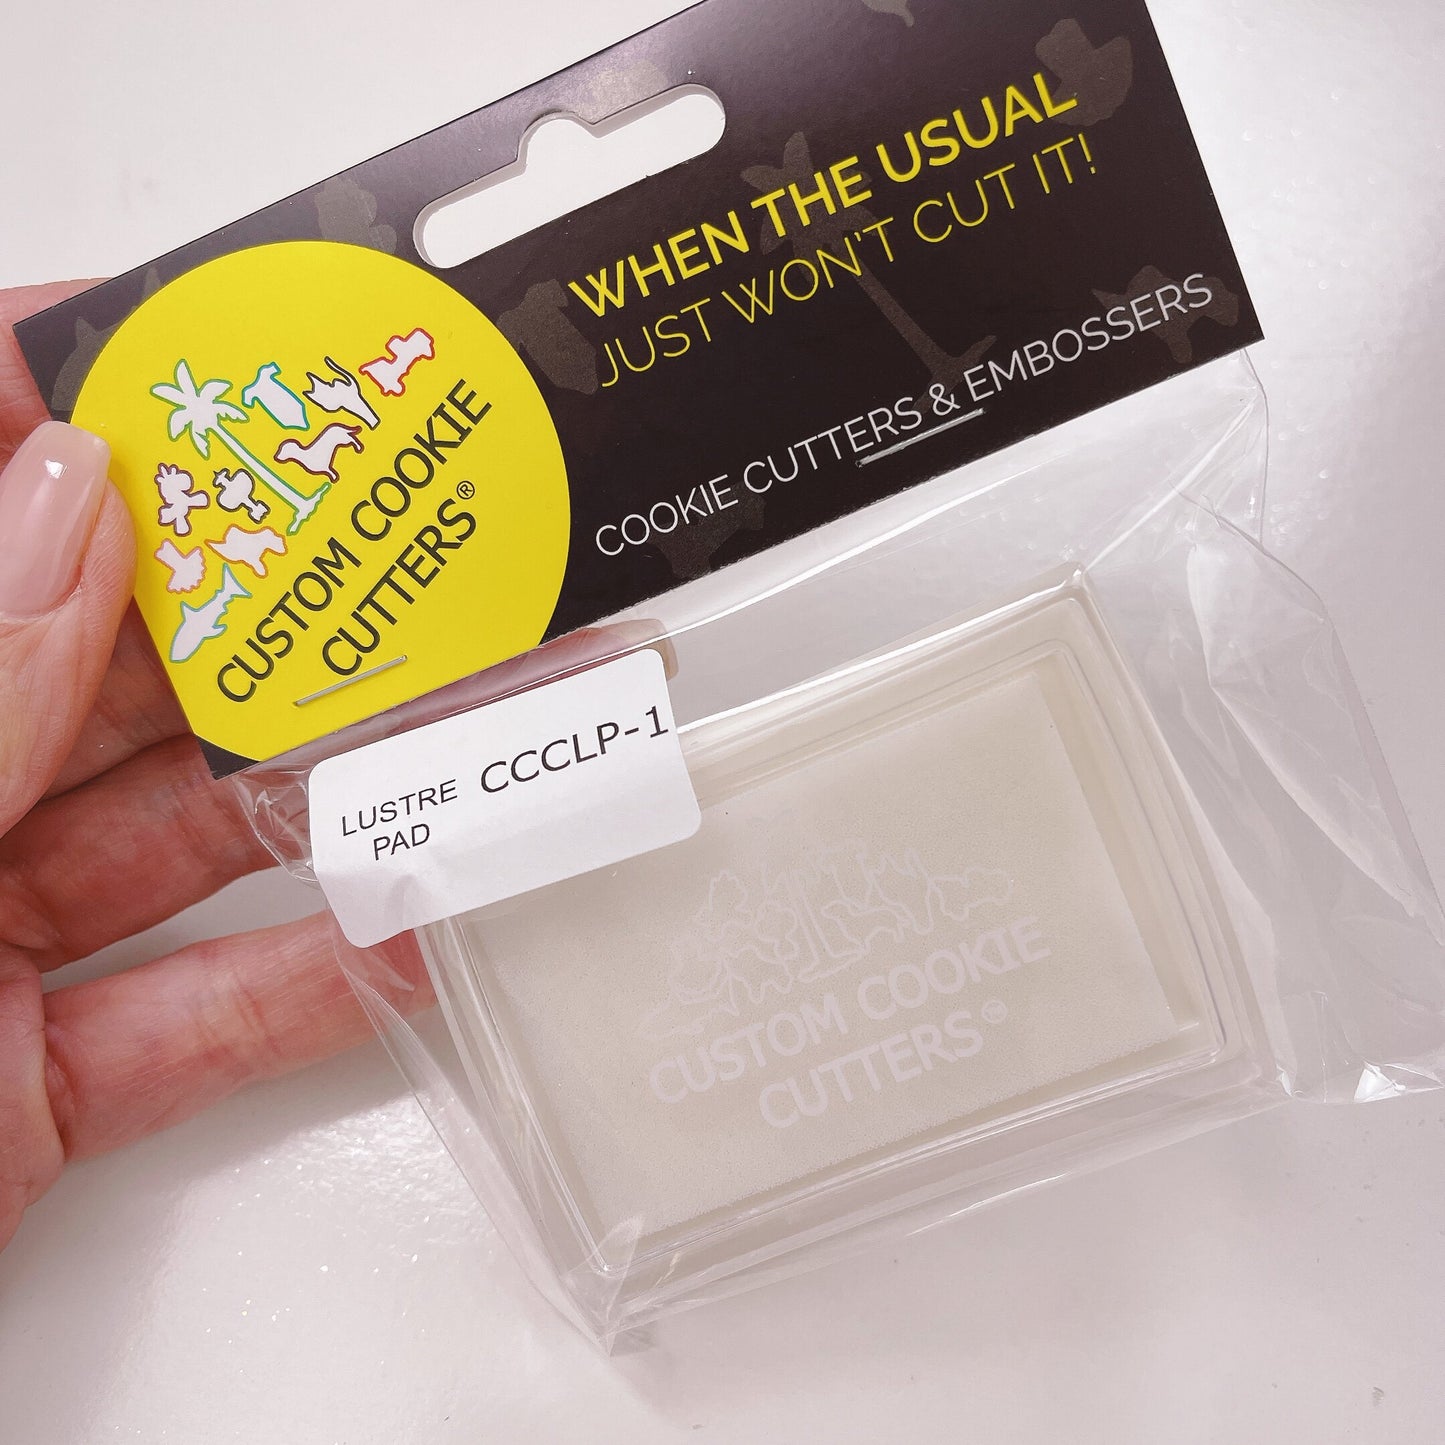 CCC Lustre Stamping Starter Kit and Pads